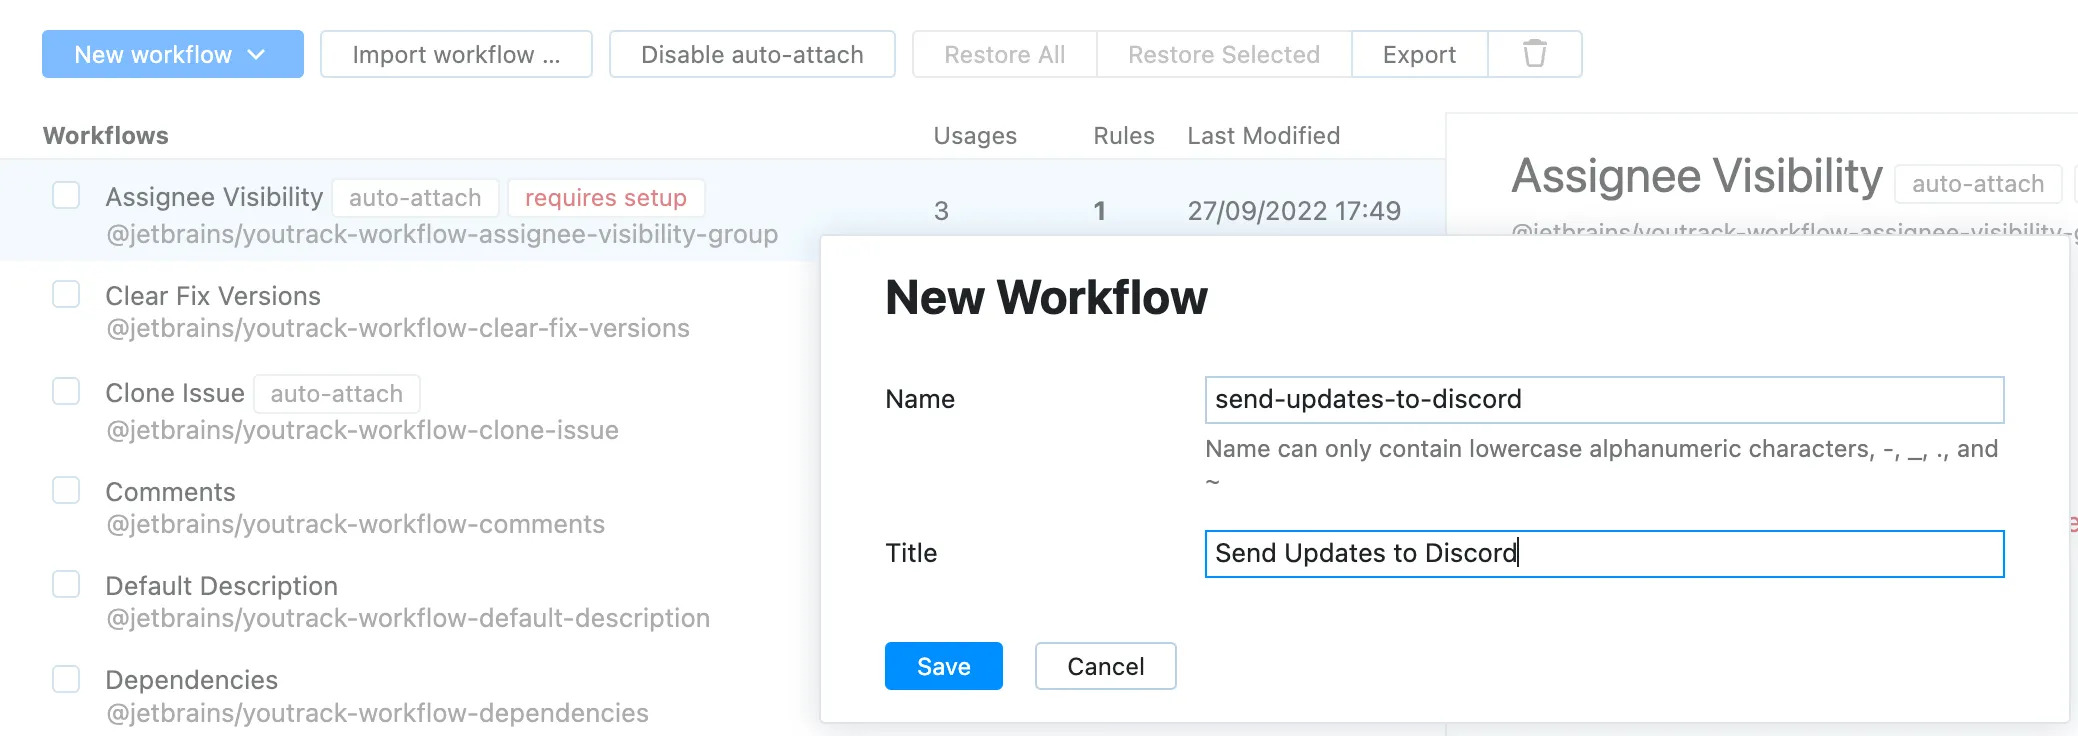 YouTrack new workflow creation